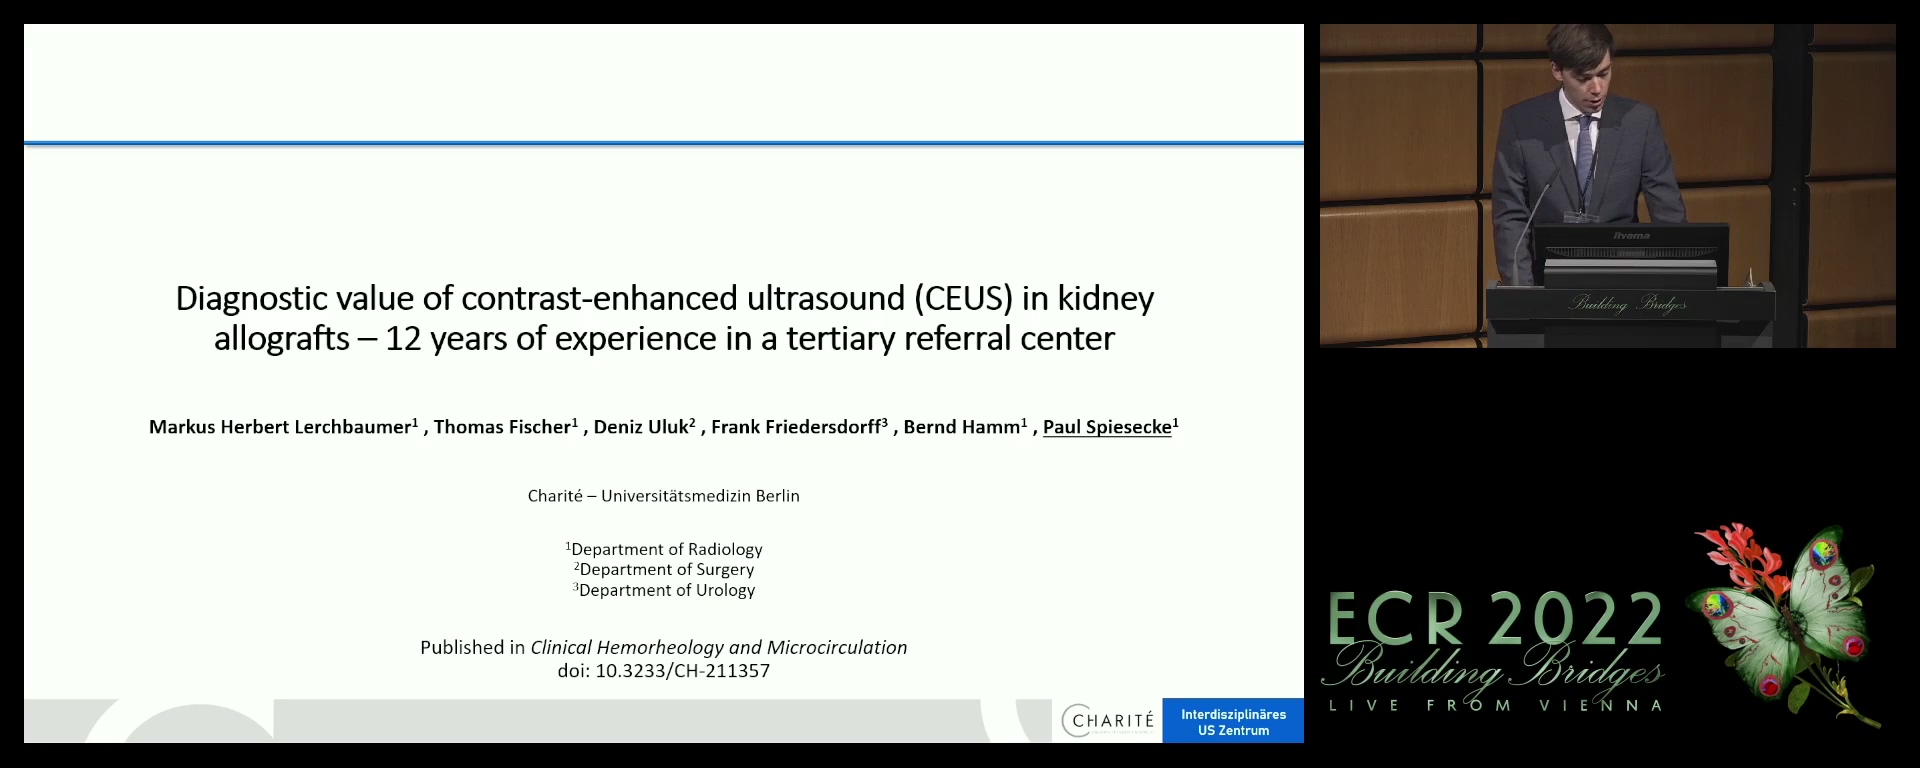 Diagnostic value of contrast-enhanced ultrasound in renal grafts: a 12 year tertial referral centre experience - Paul Spiesecke, Berlin / DE